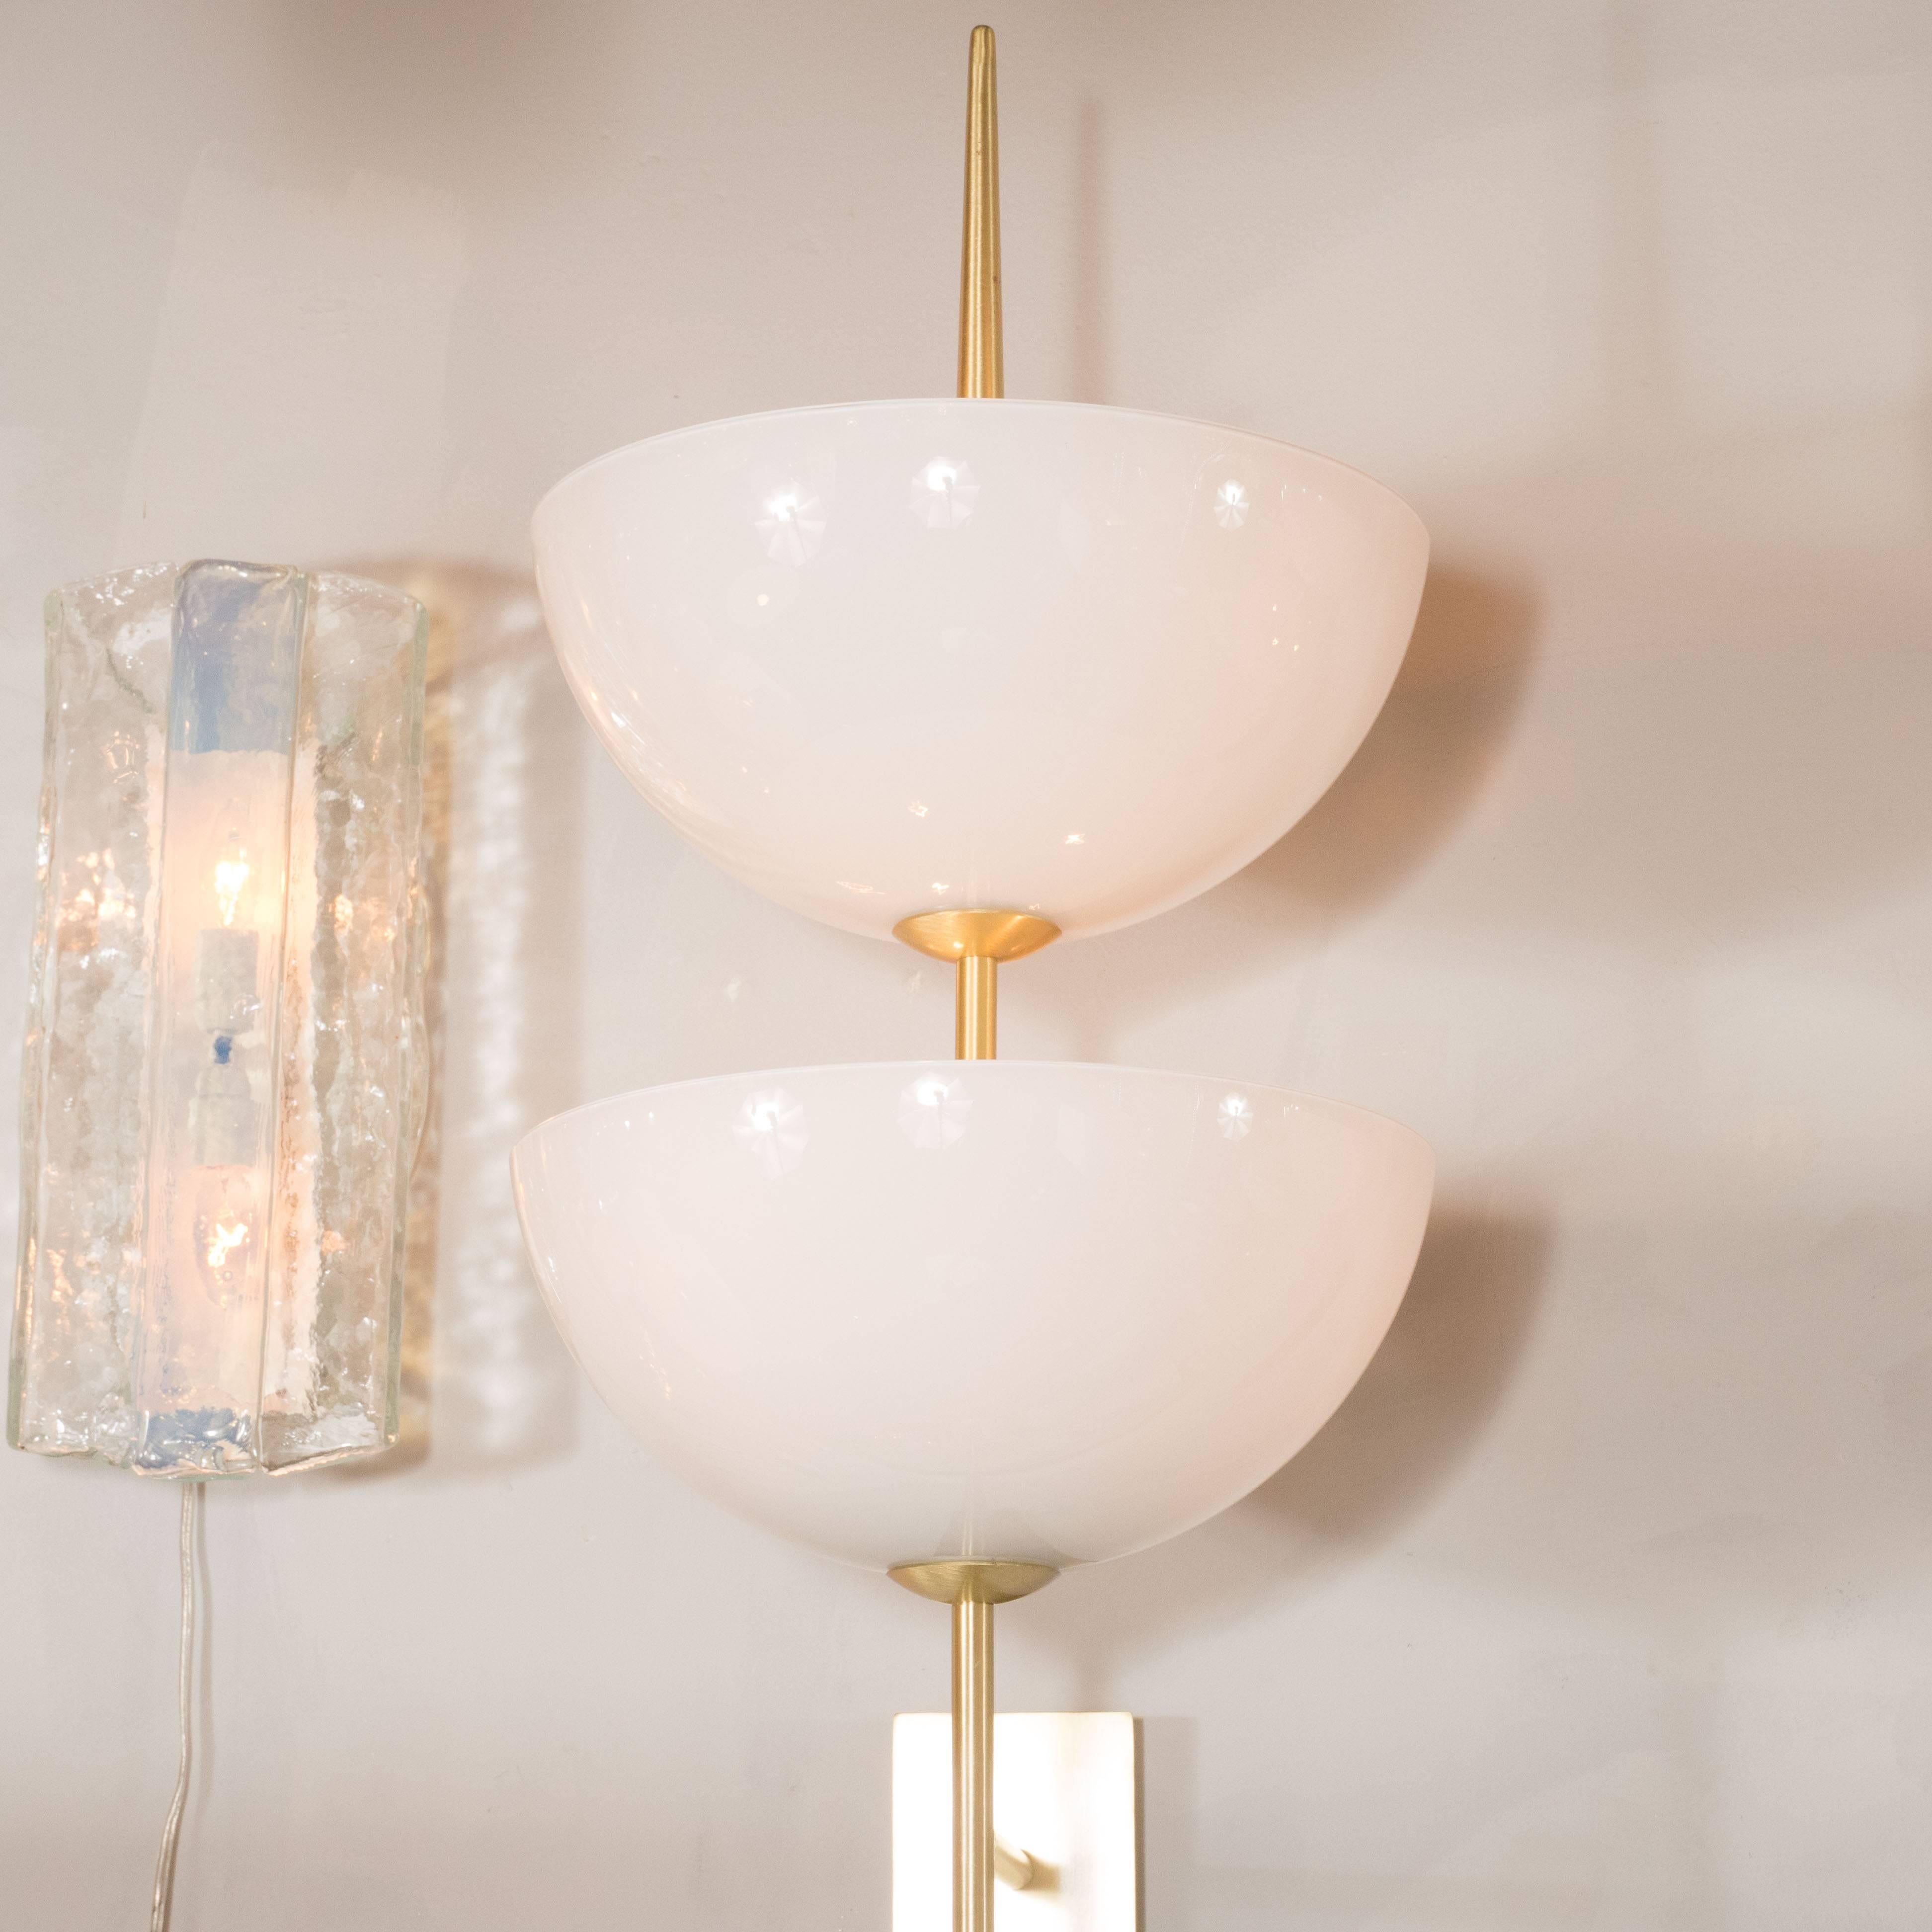 Italian Pair of Reverse-Dome Trophy Sconces in Murano Milk Glass and Brass